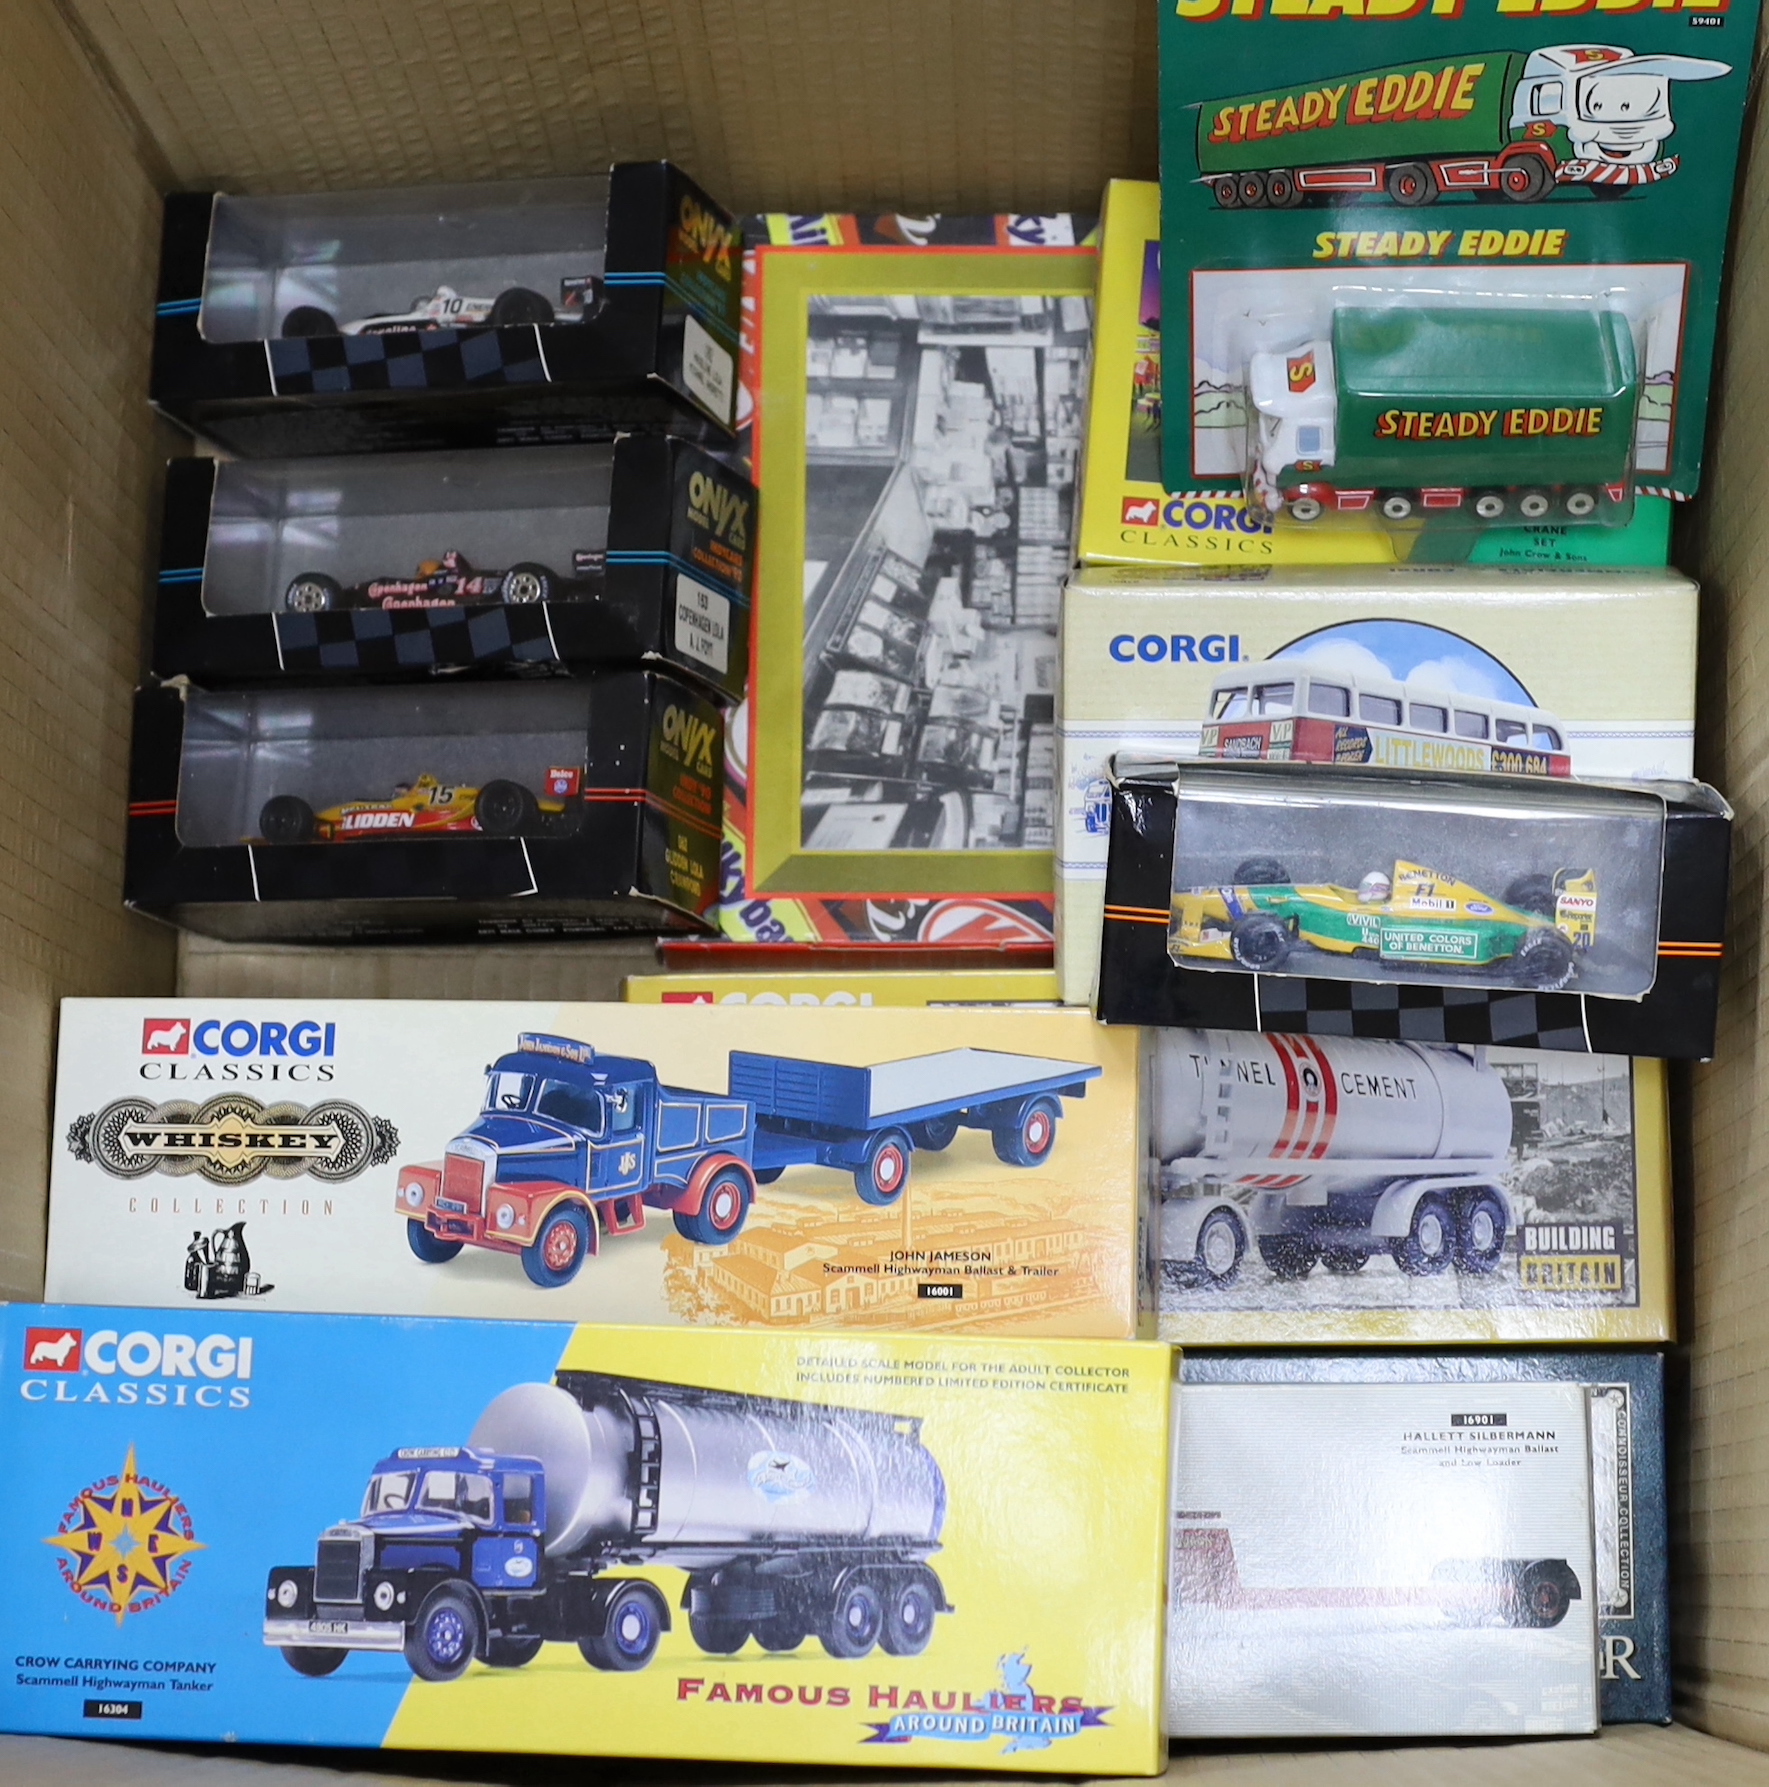 Four boxed Onyx Indie and F1 model racing cars, together with seven Corgi Classics commercial vehicles including; a Bedford VAL coach (35304), Scammell Highwayman Tanker (16305), Scammell Highwayman low loader (16901), e